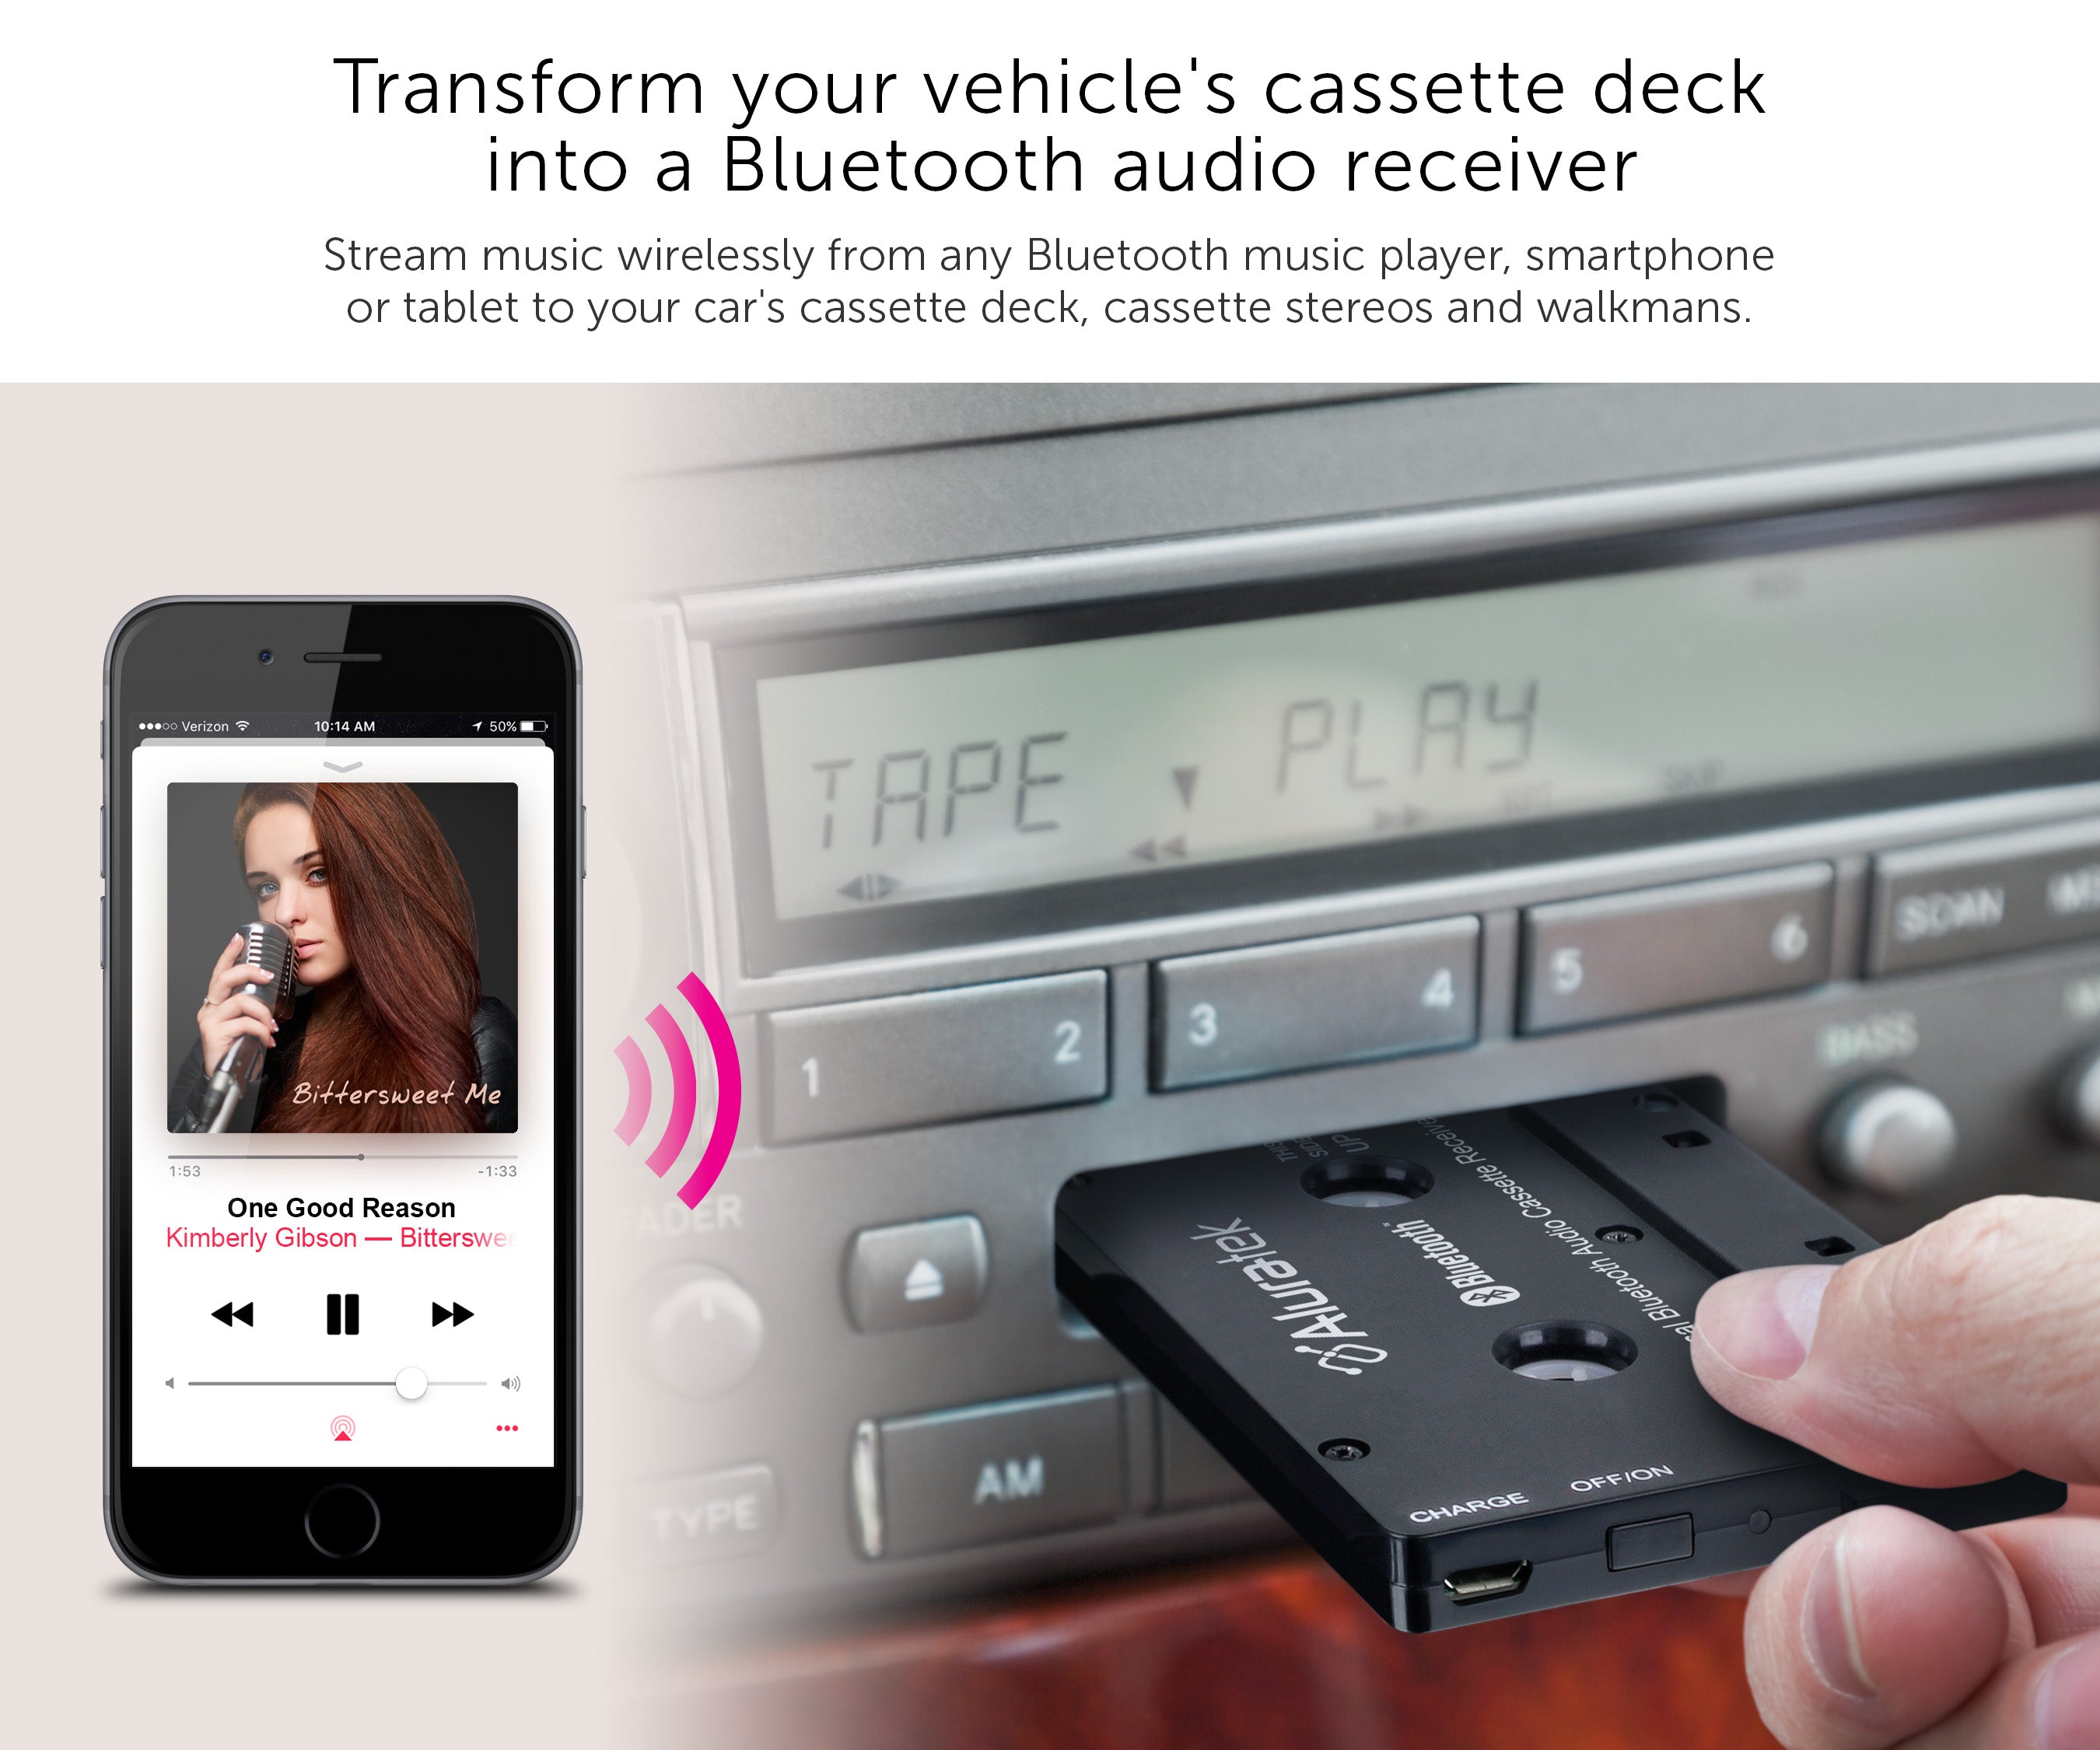 arsvita Car Audio aux Cassette Adapter and a Smartphone to 3.5 mm